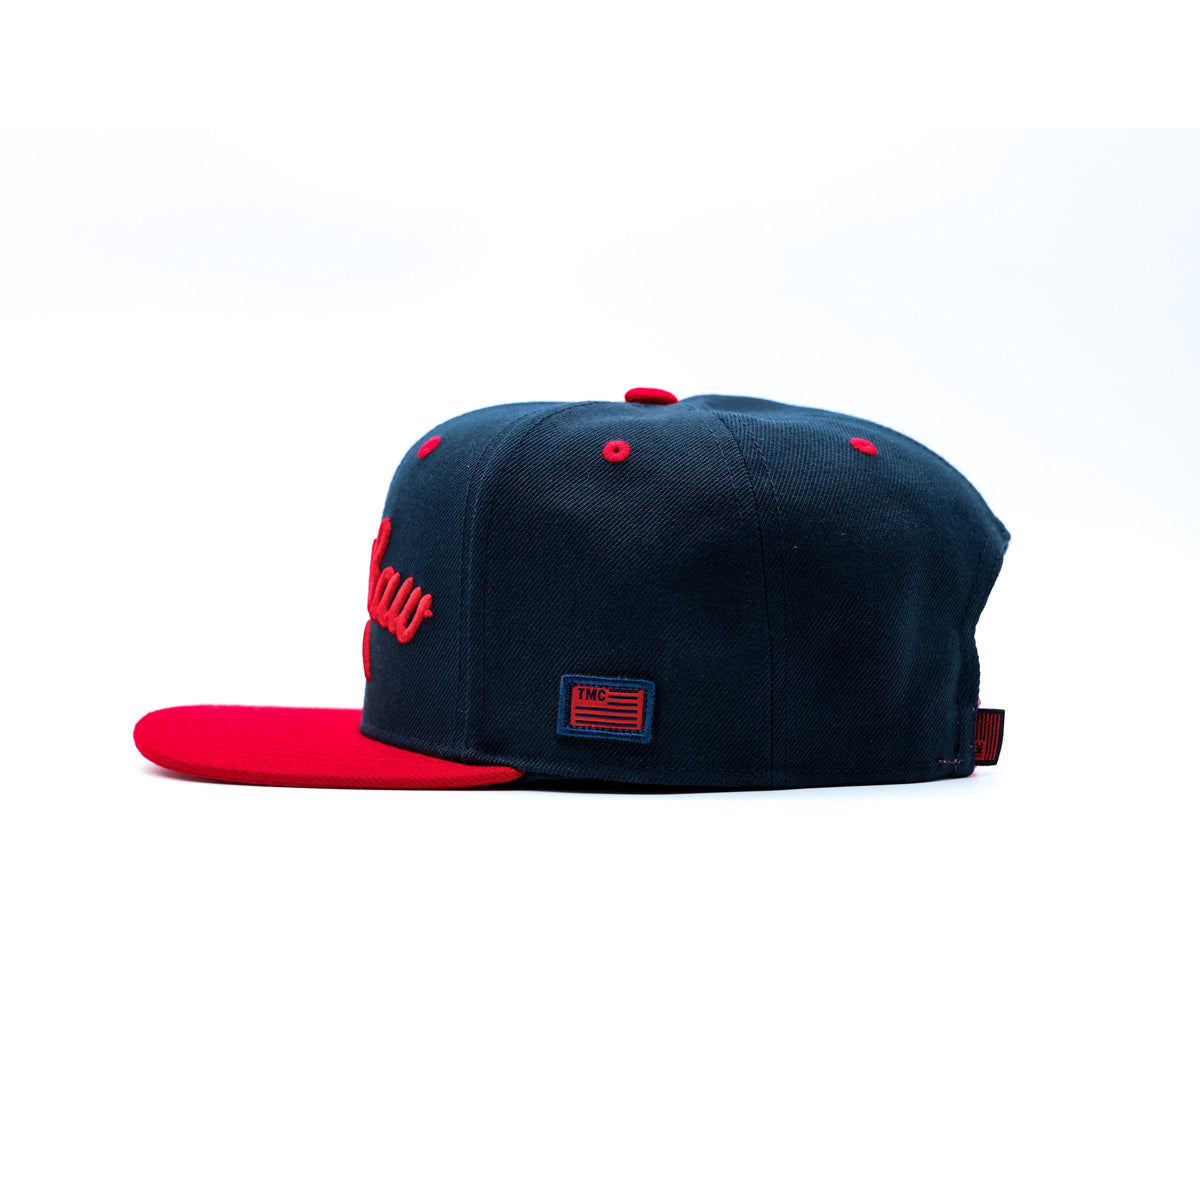 Crenshaw Limited Edition Snapback - Navy/Red [Two-Tone] - Side